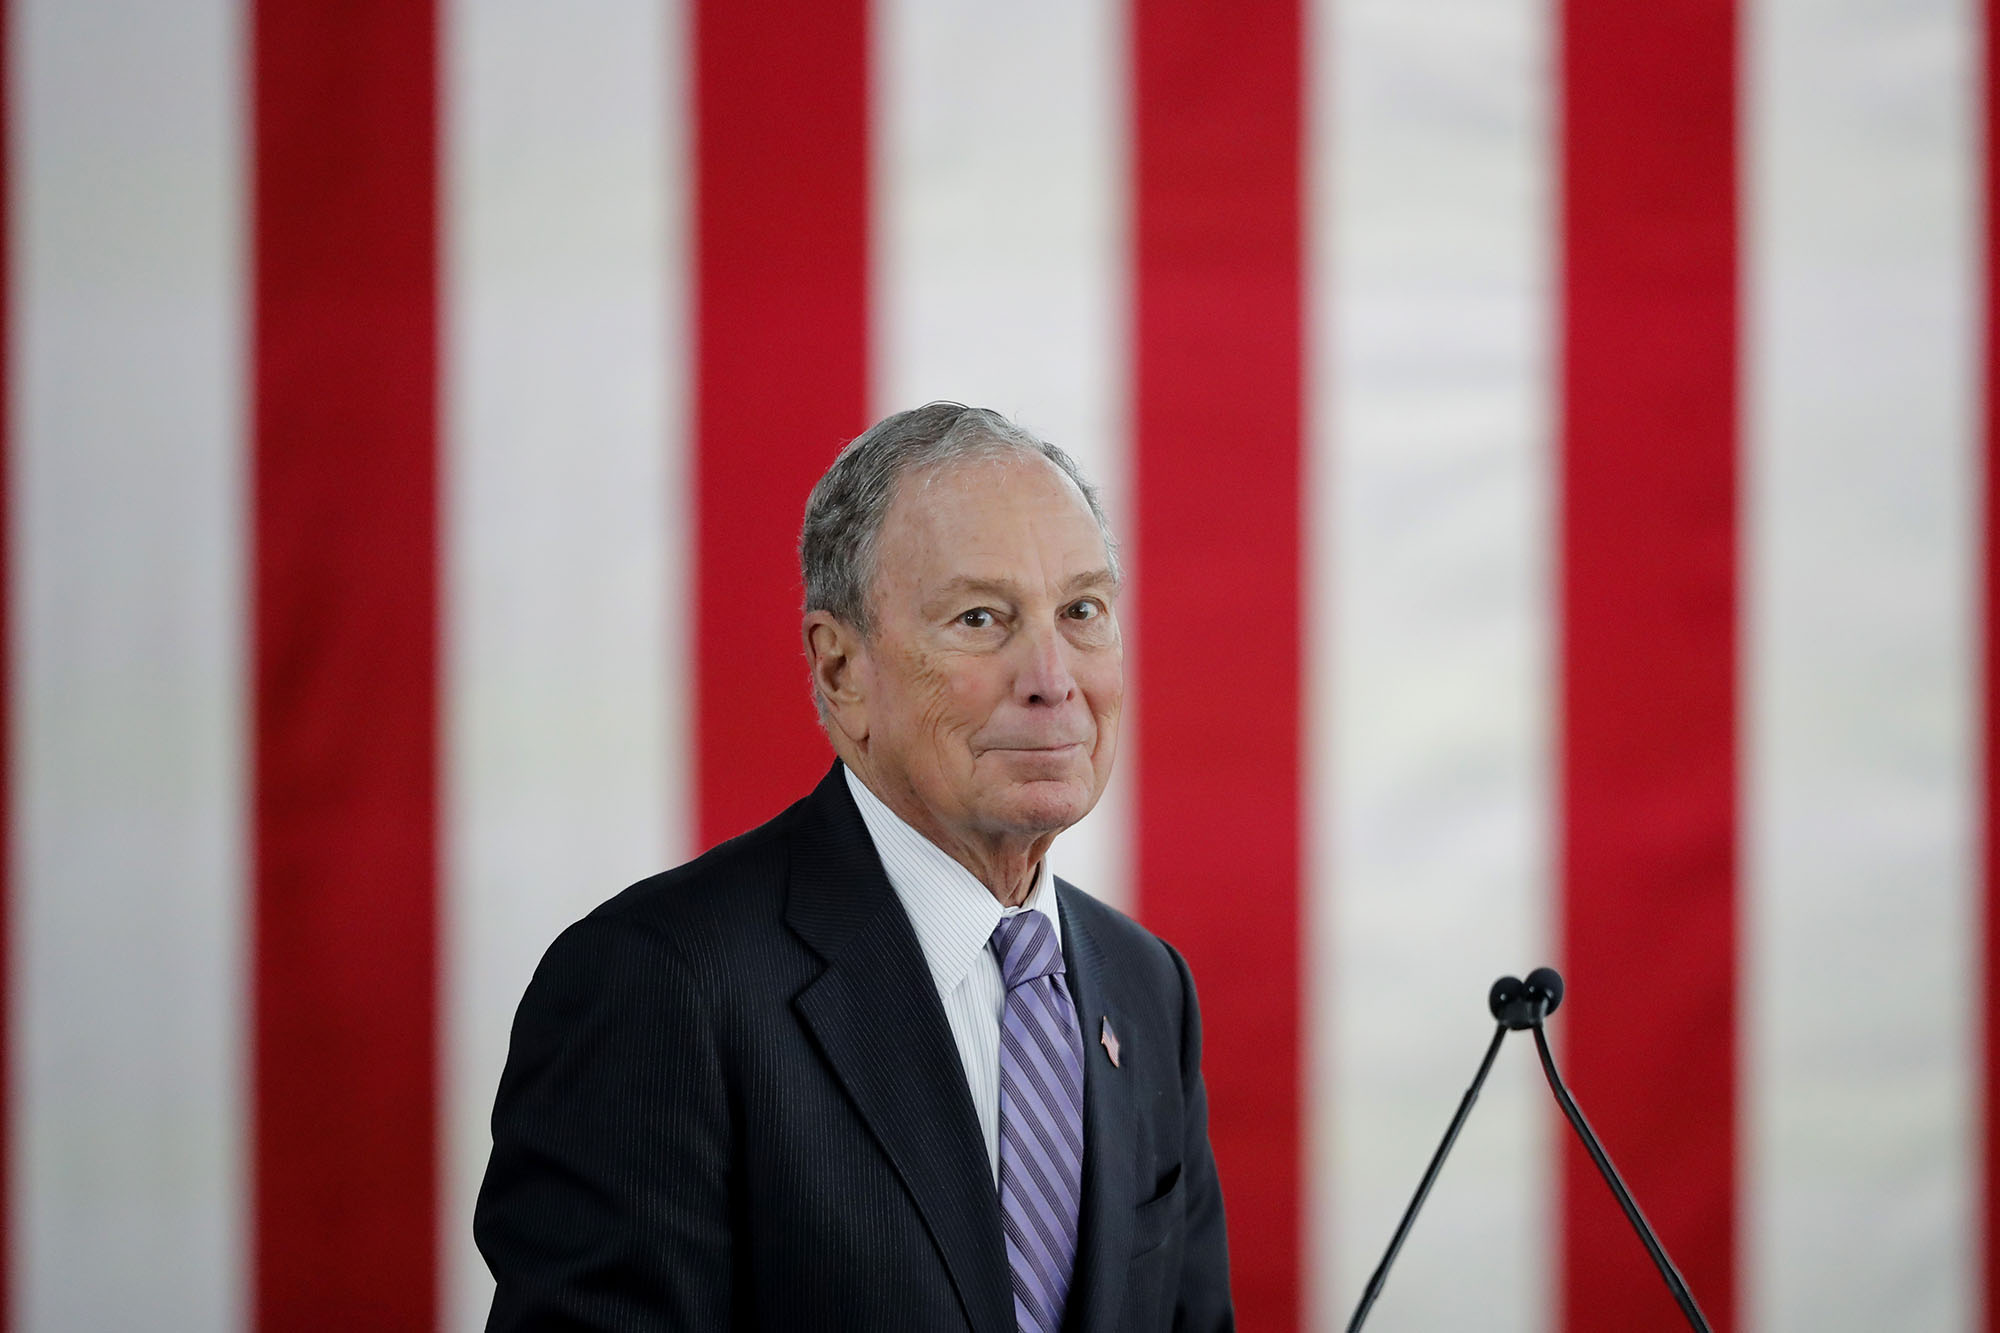 Michael Bloomberg, during a speaking event, with the stripes of the American flag in the background.